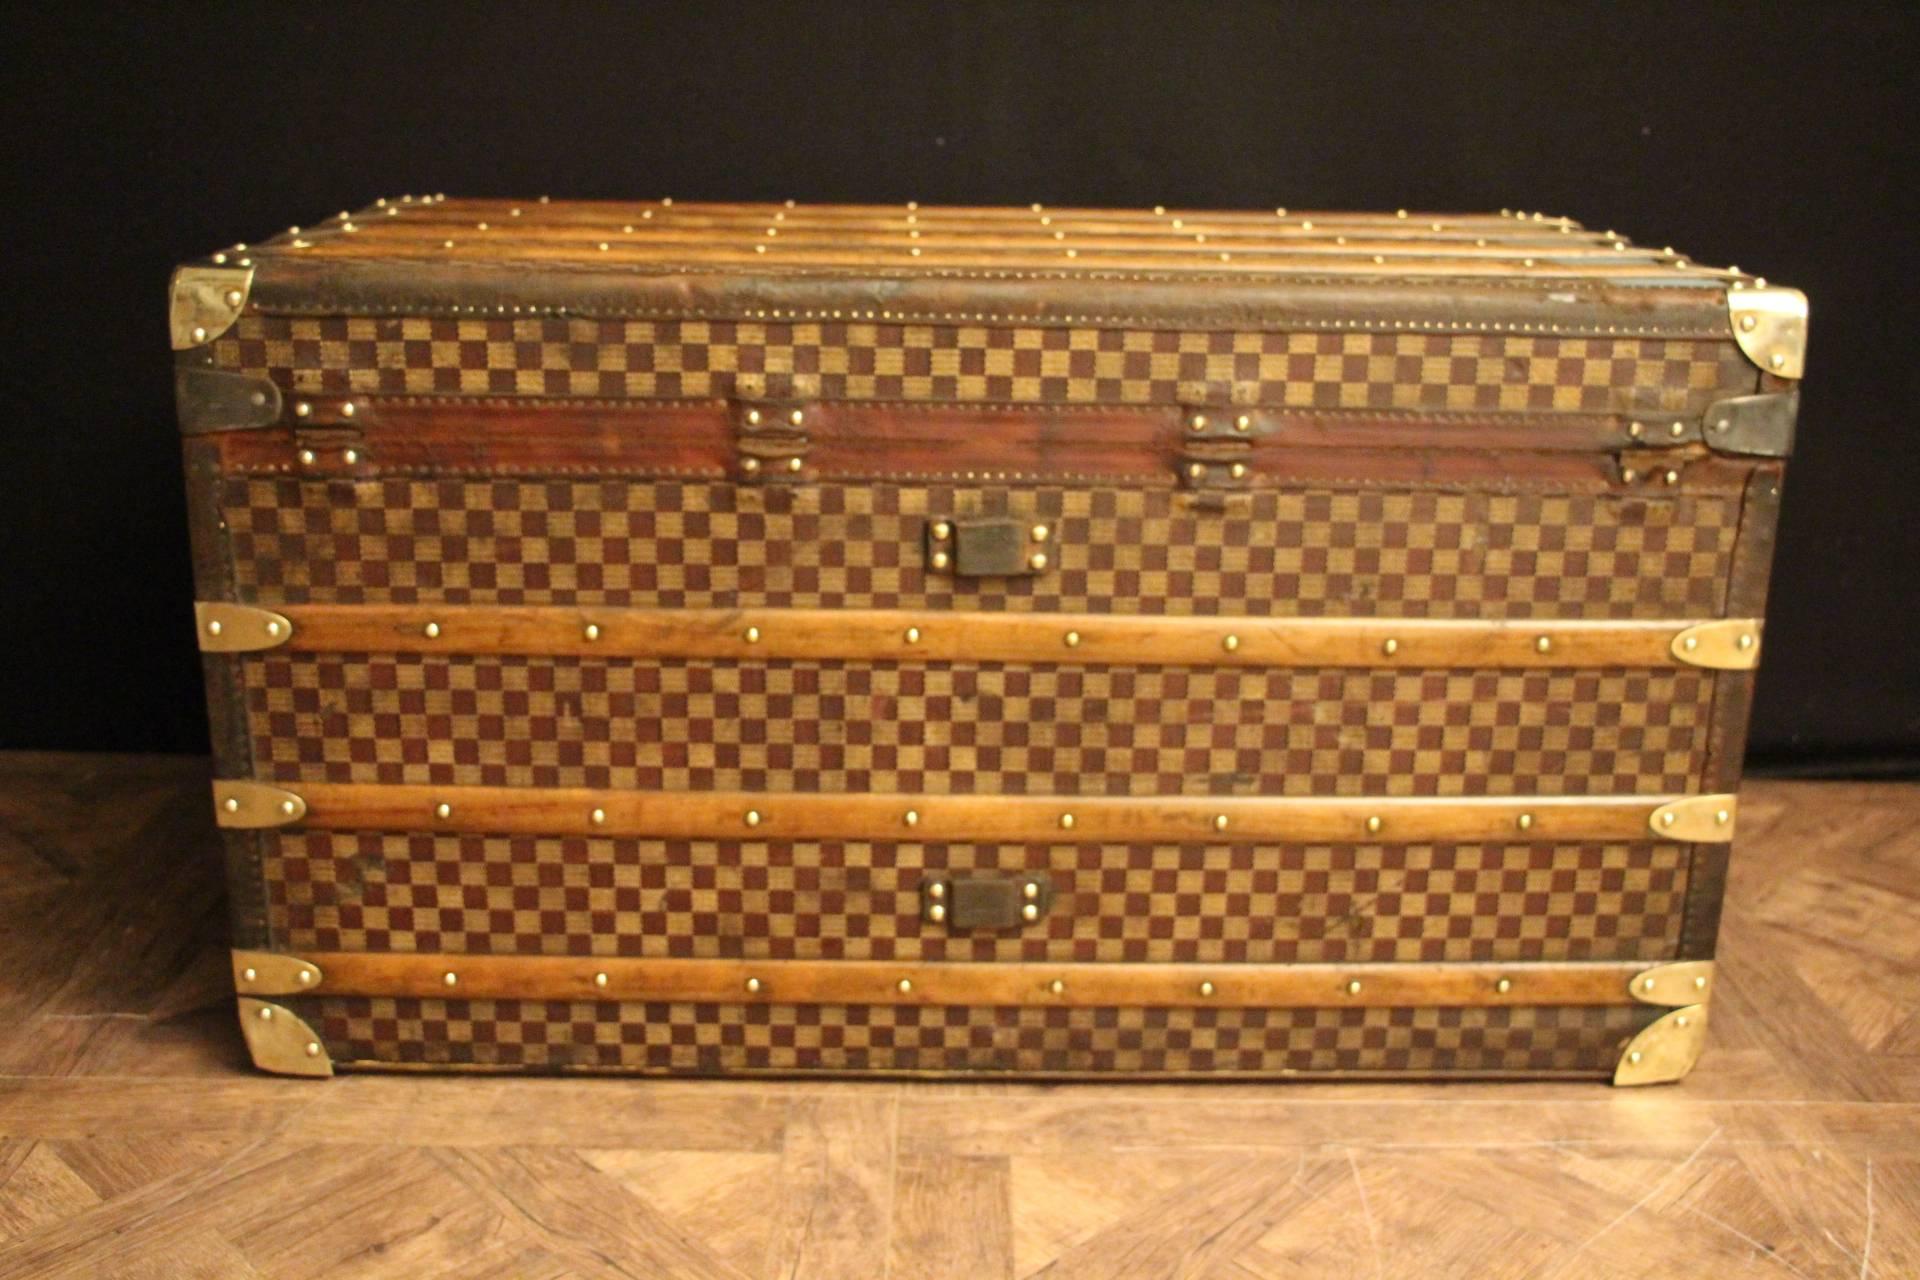 This Moynat steamer trunk features the very nice 